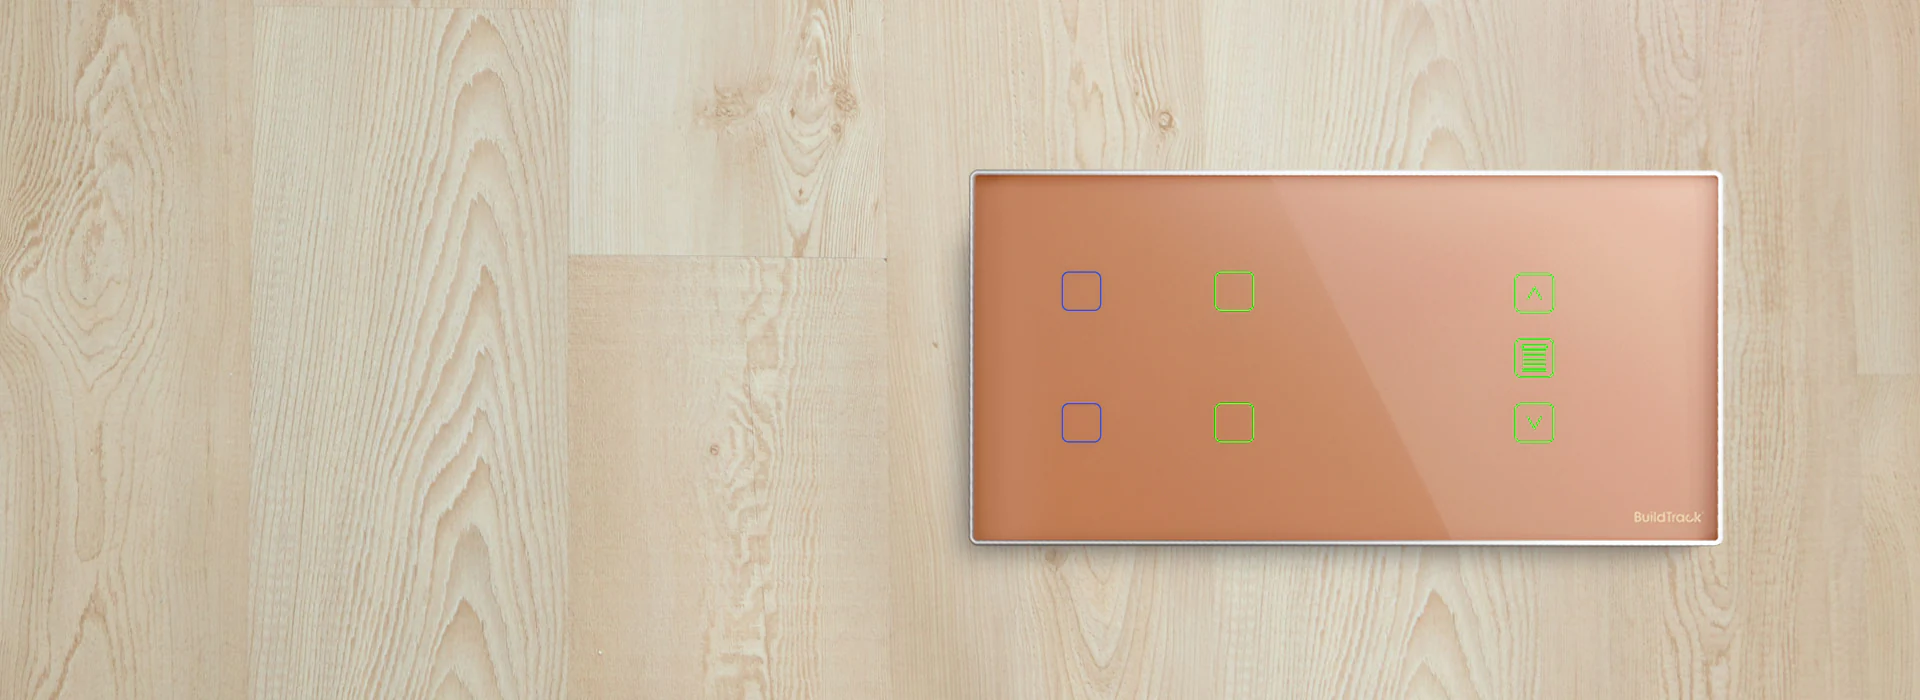 modern touch light switches